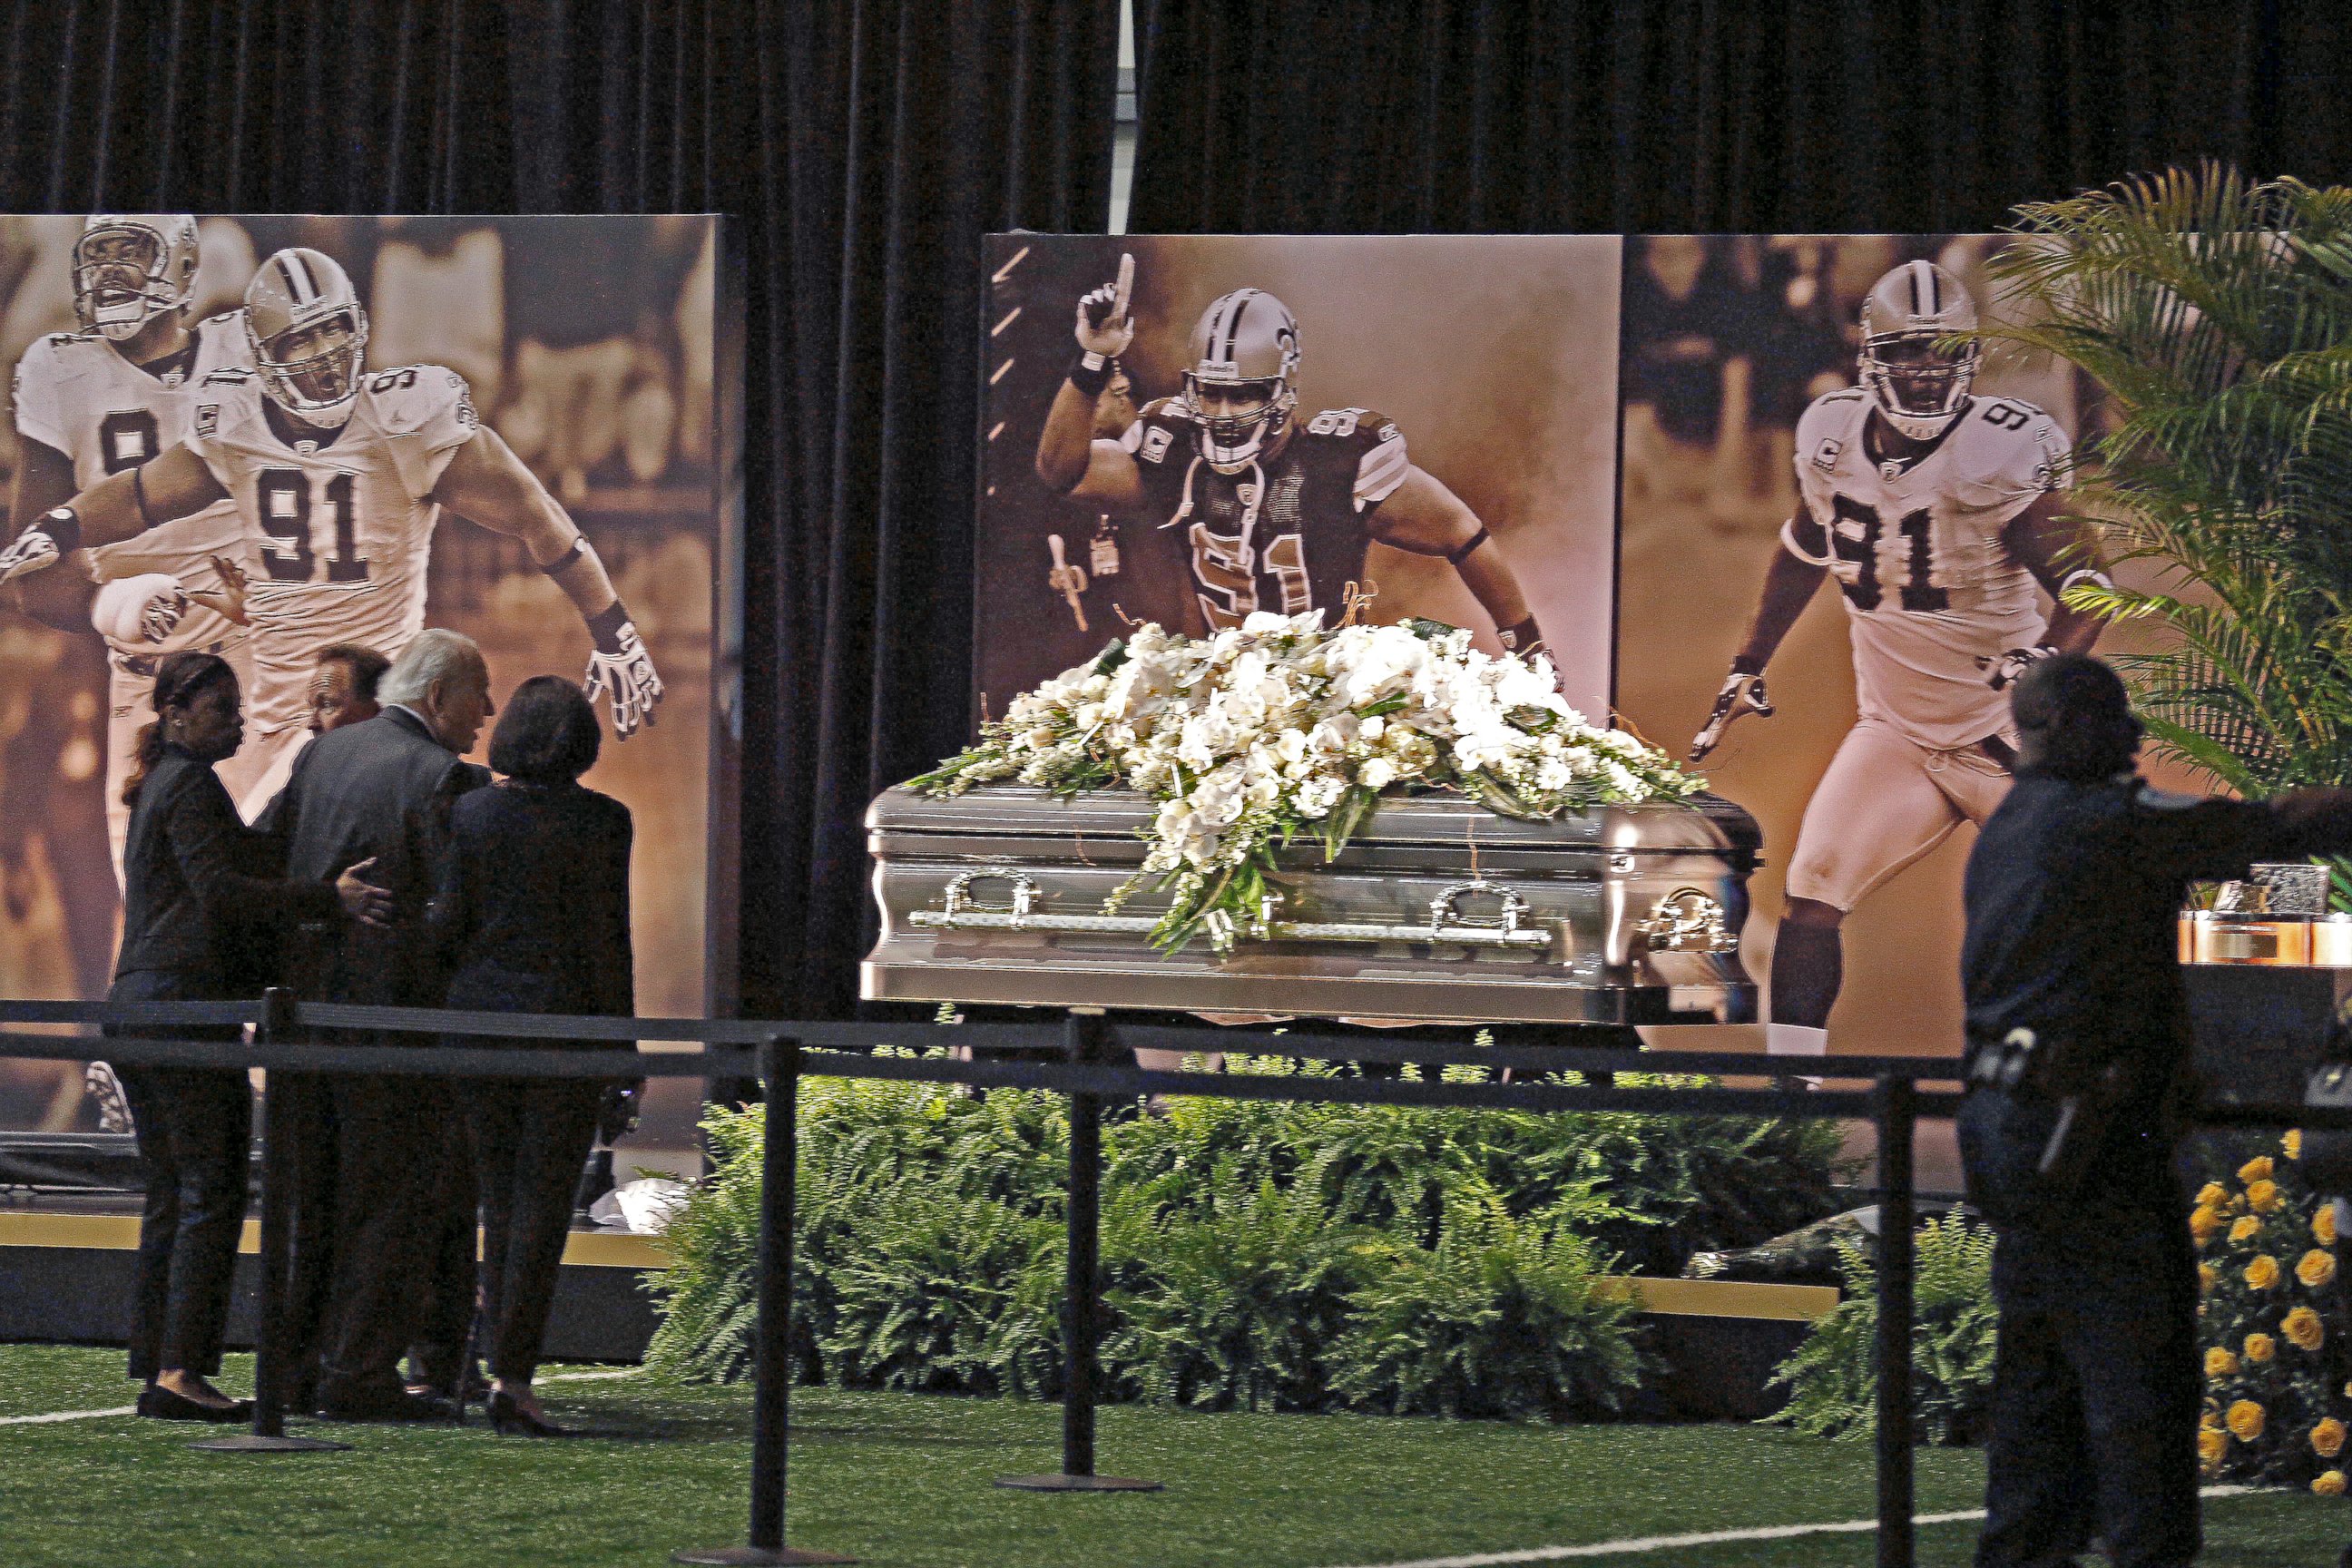 PHOTO: New Orleans Saints owner Tom Benson and his wife Gayle Benson view the casket of former Saints defensive end Will Smith during a public viewing inside the Saints training facility in Metairie, Louisiana, April 15, 2016. 